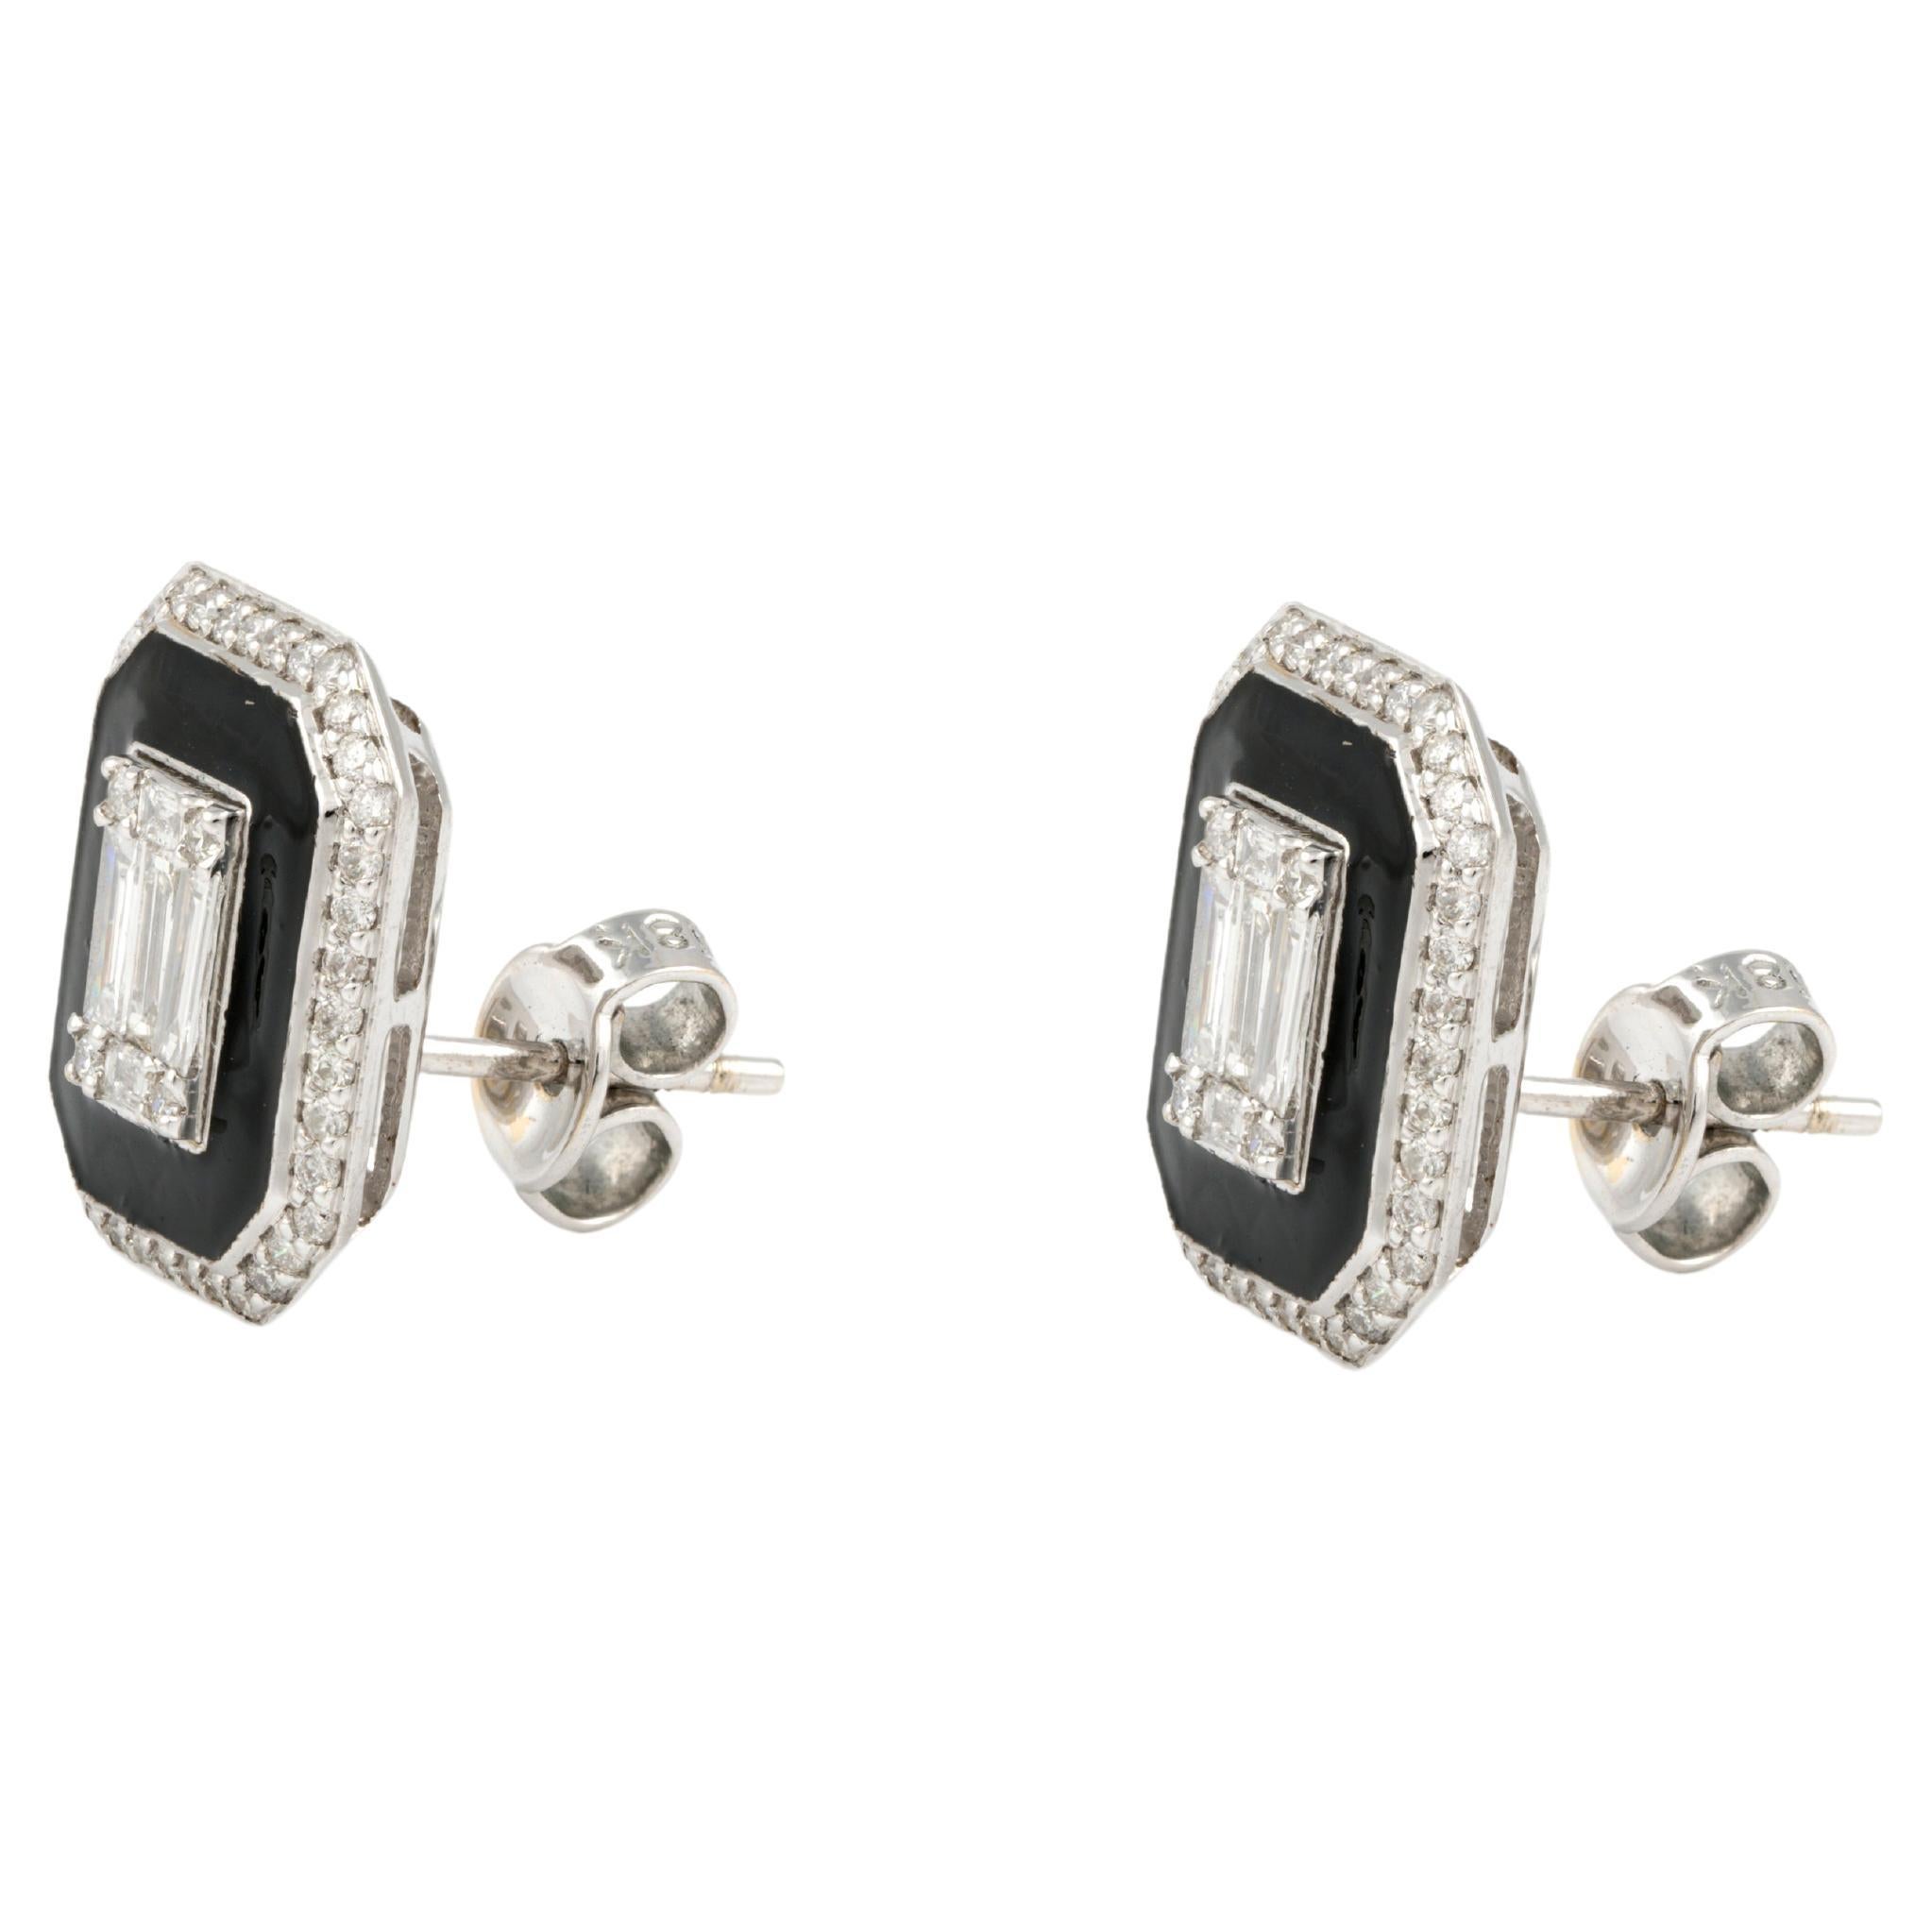 Natural Diamond 1.02cts in 18k Gold 6.036gms Earring